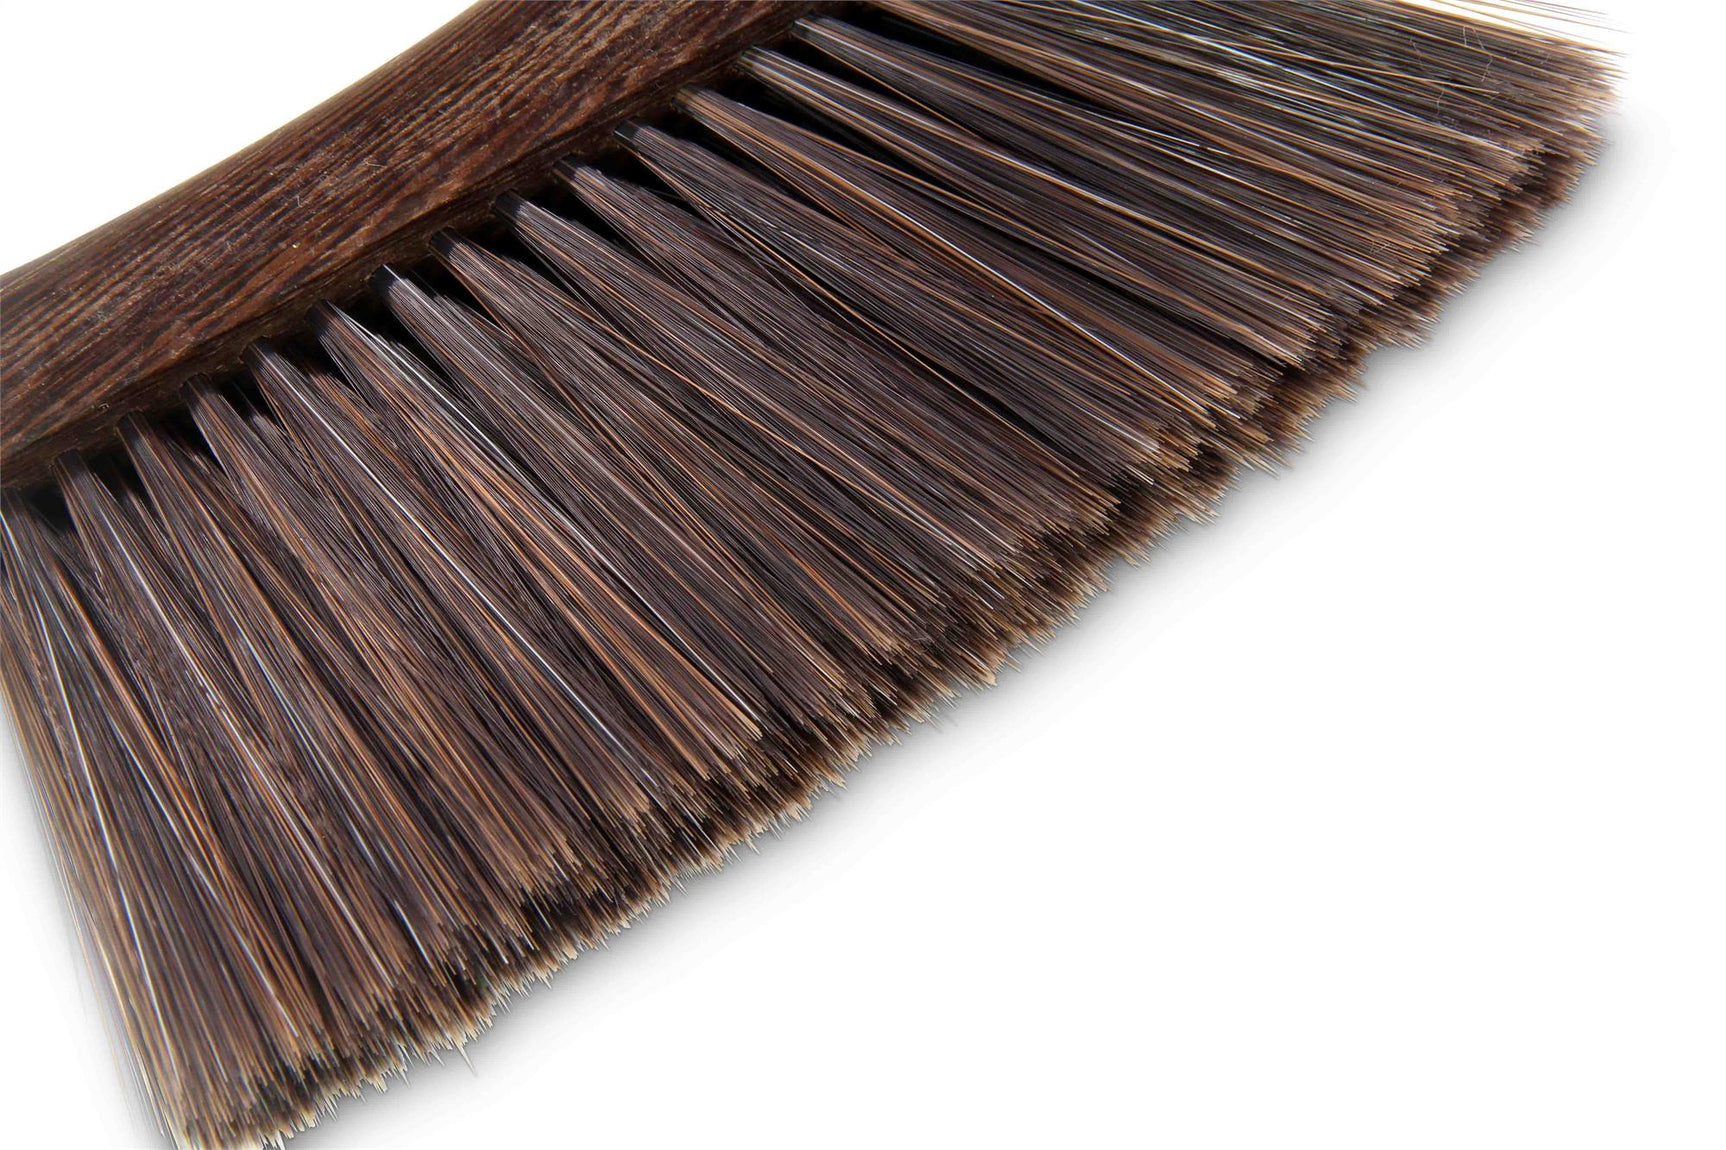 Giant Brown Snooker and Pool Rail Brush 14 Inch Handle with 8 Inch Imitation Horsehair Bristles